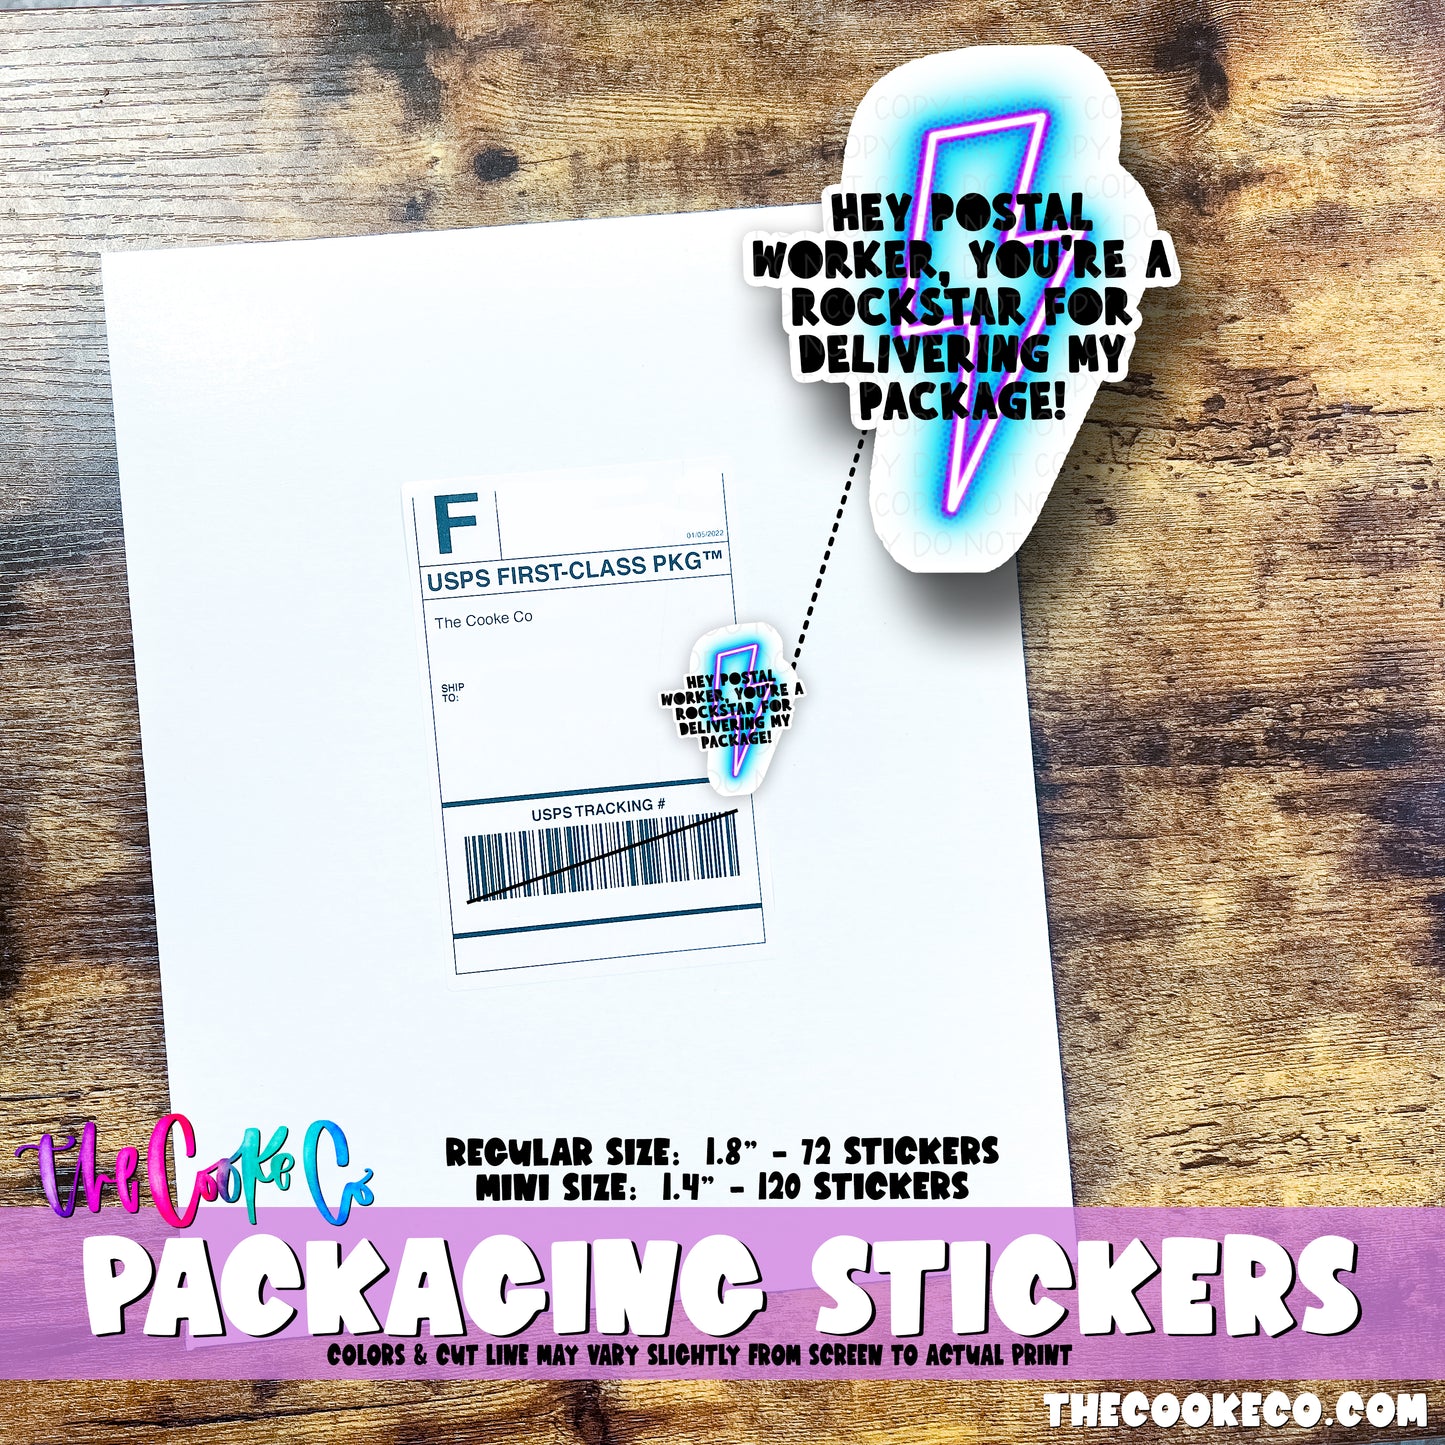 PTO Packaging Stickers | #C0840 - YOU'RE A ROCKSTAR FOR DELIVERING MY PACKAGE